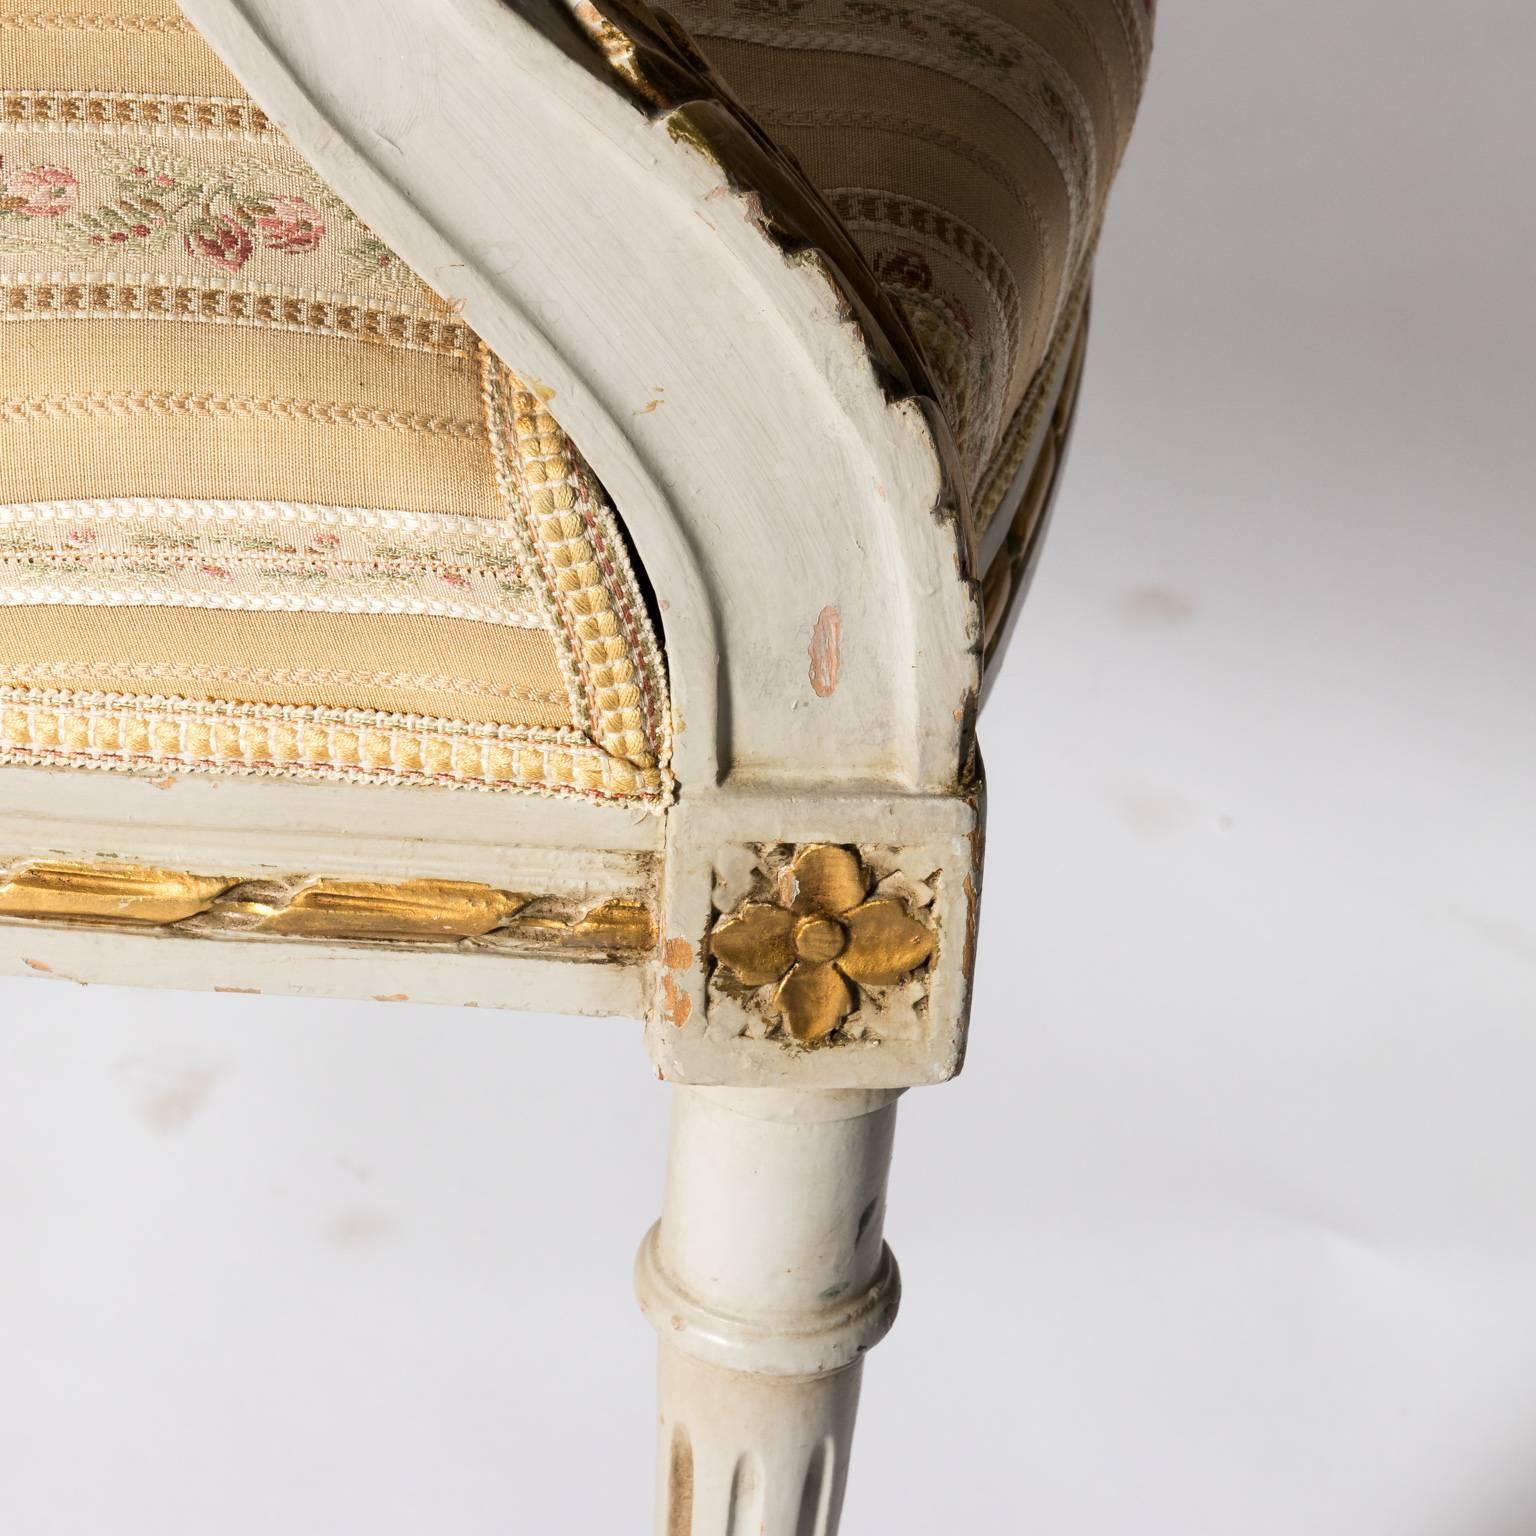 White painted Louis XVI style armchairs with rounded backs and gilded foliage detailing, circa early 20th century.
 